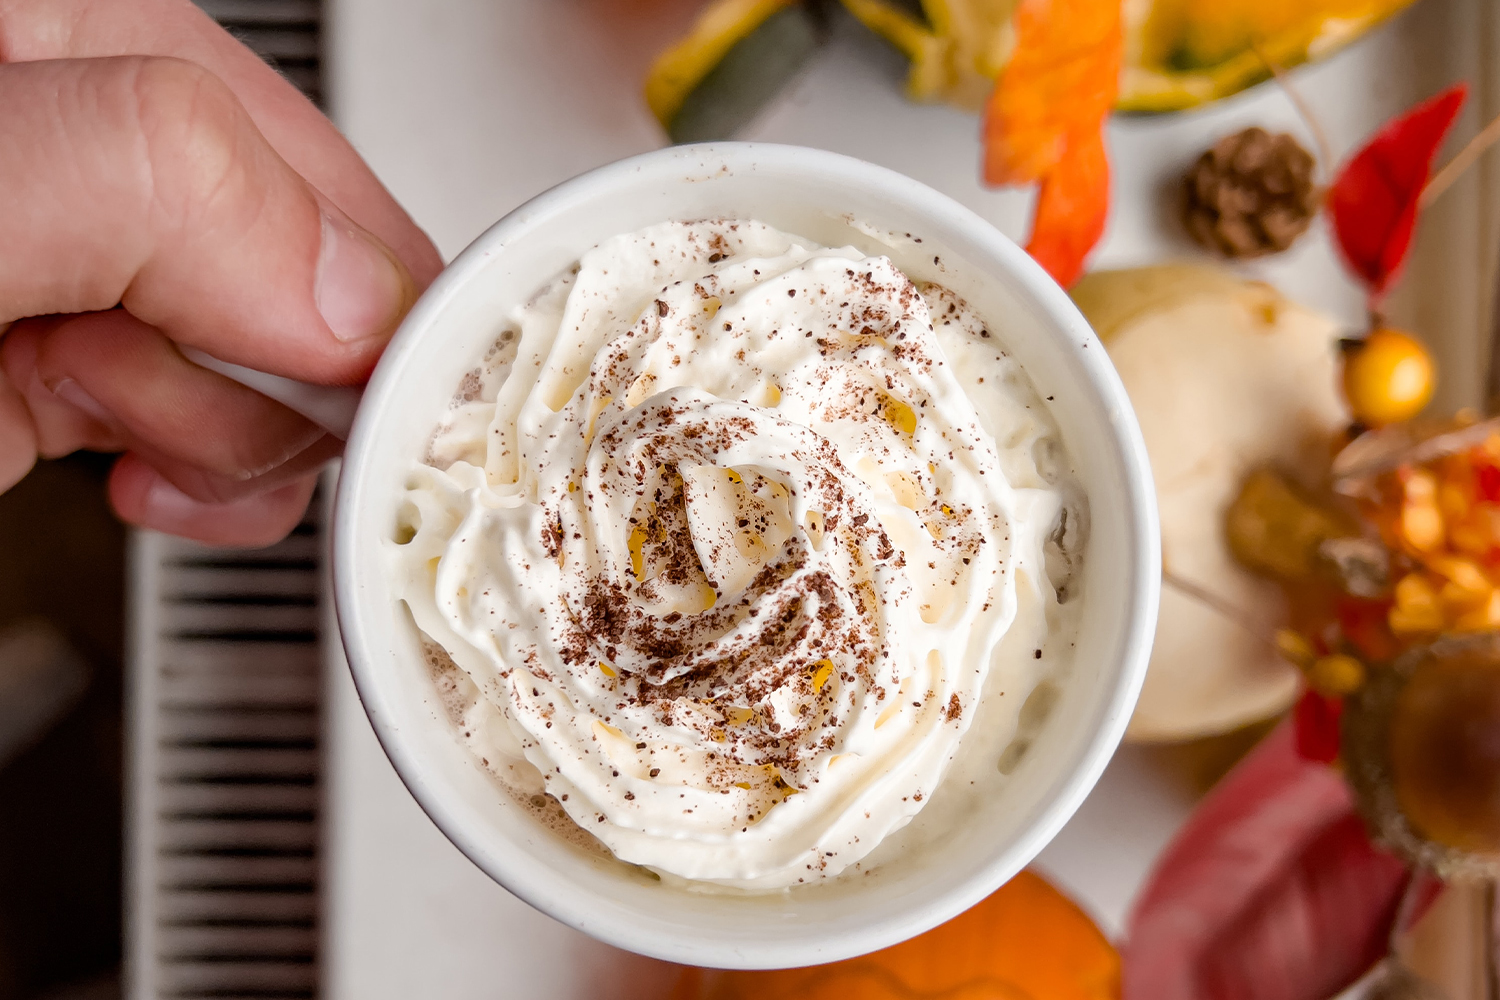 A close-up image of a person’s hand holding a pumpkin spice latte with fall decor below.